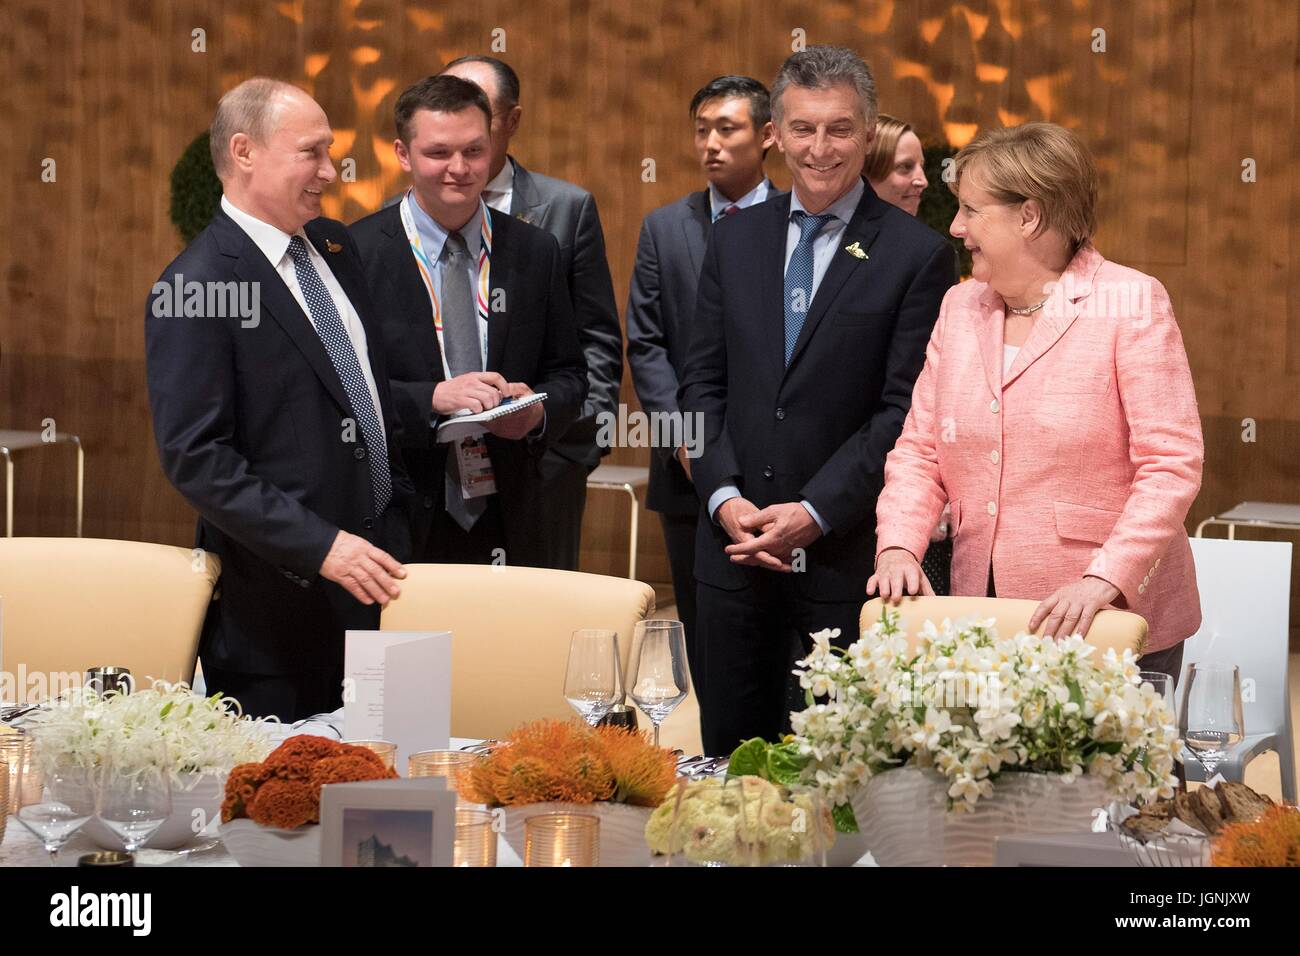 Russian President Vladimir Putin, left, talks with German Chancellor Angela Merkel and Argentine President Mauricio Macri before the start of a dinner for world leaders attending the first day of the G20 Summit meeting at the Elbphilharmonie concert hall July 7, 2017 in Hamburg, Germany.   (Bundesregierung/Bergmann via Planetpix) Stock Photo